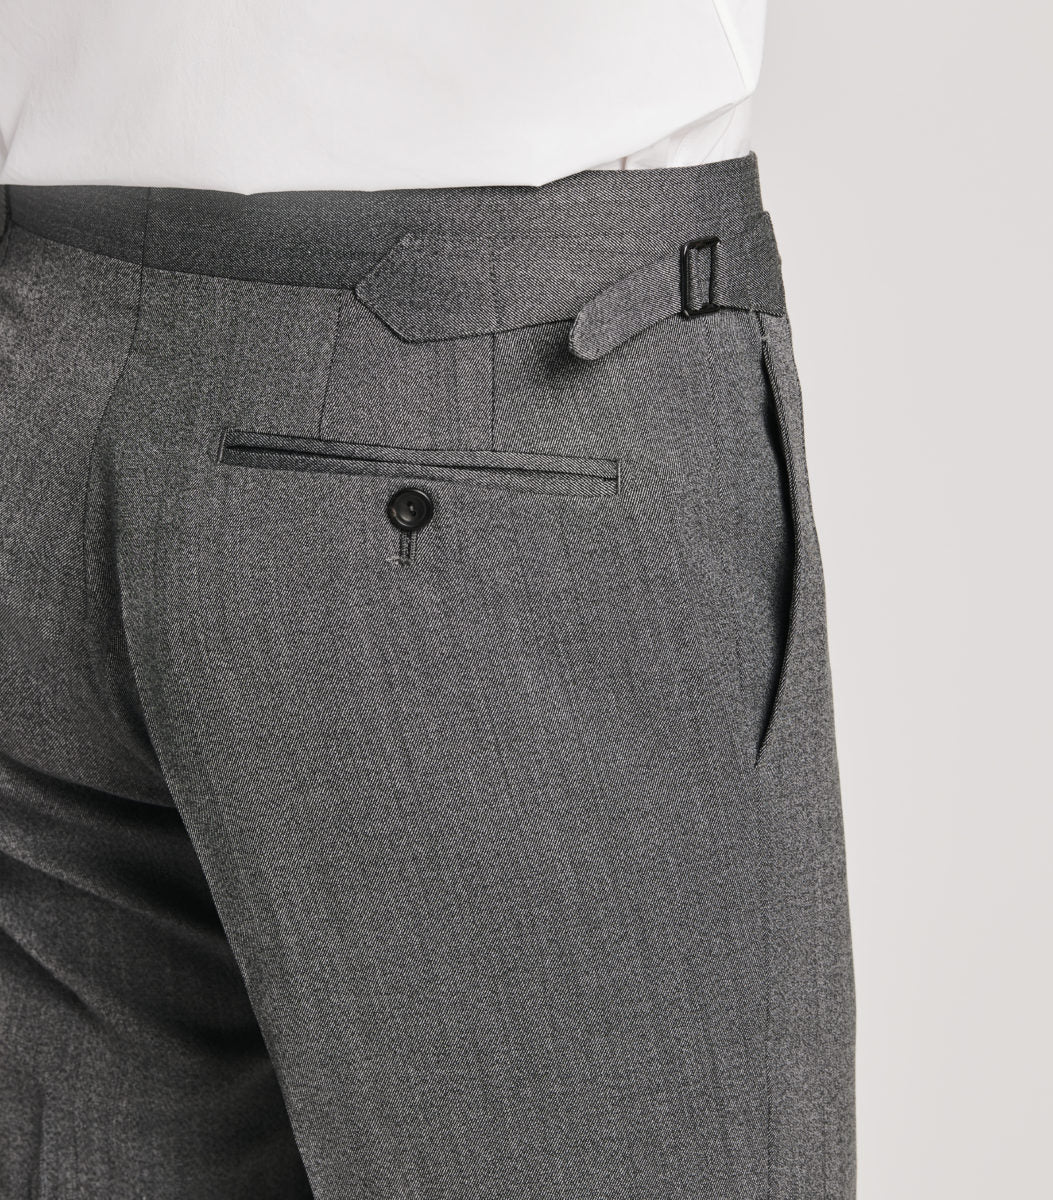 Caine Sport Navy Wool Twill Trousers  Kit Blake